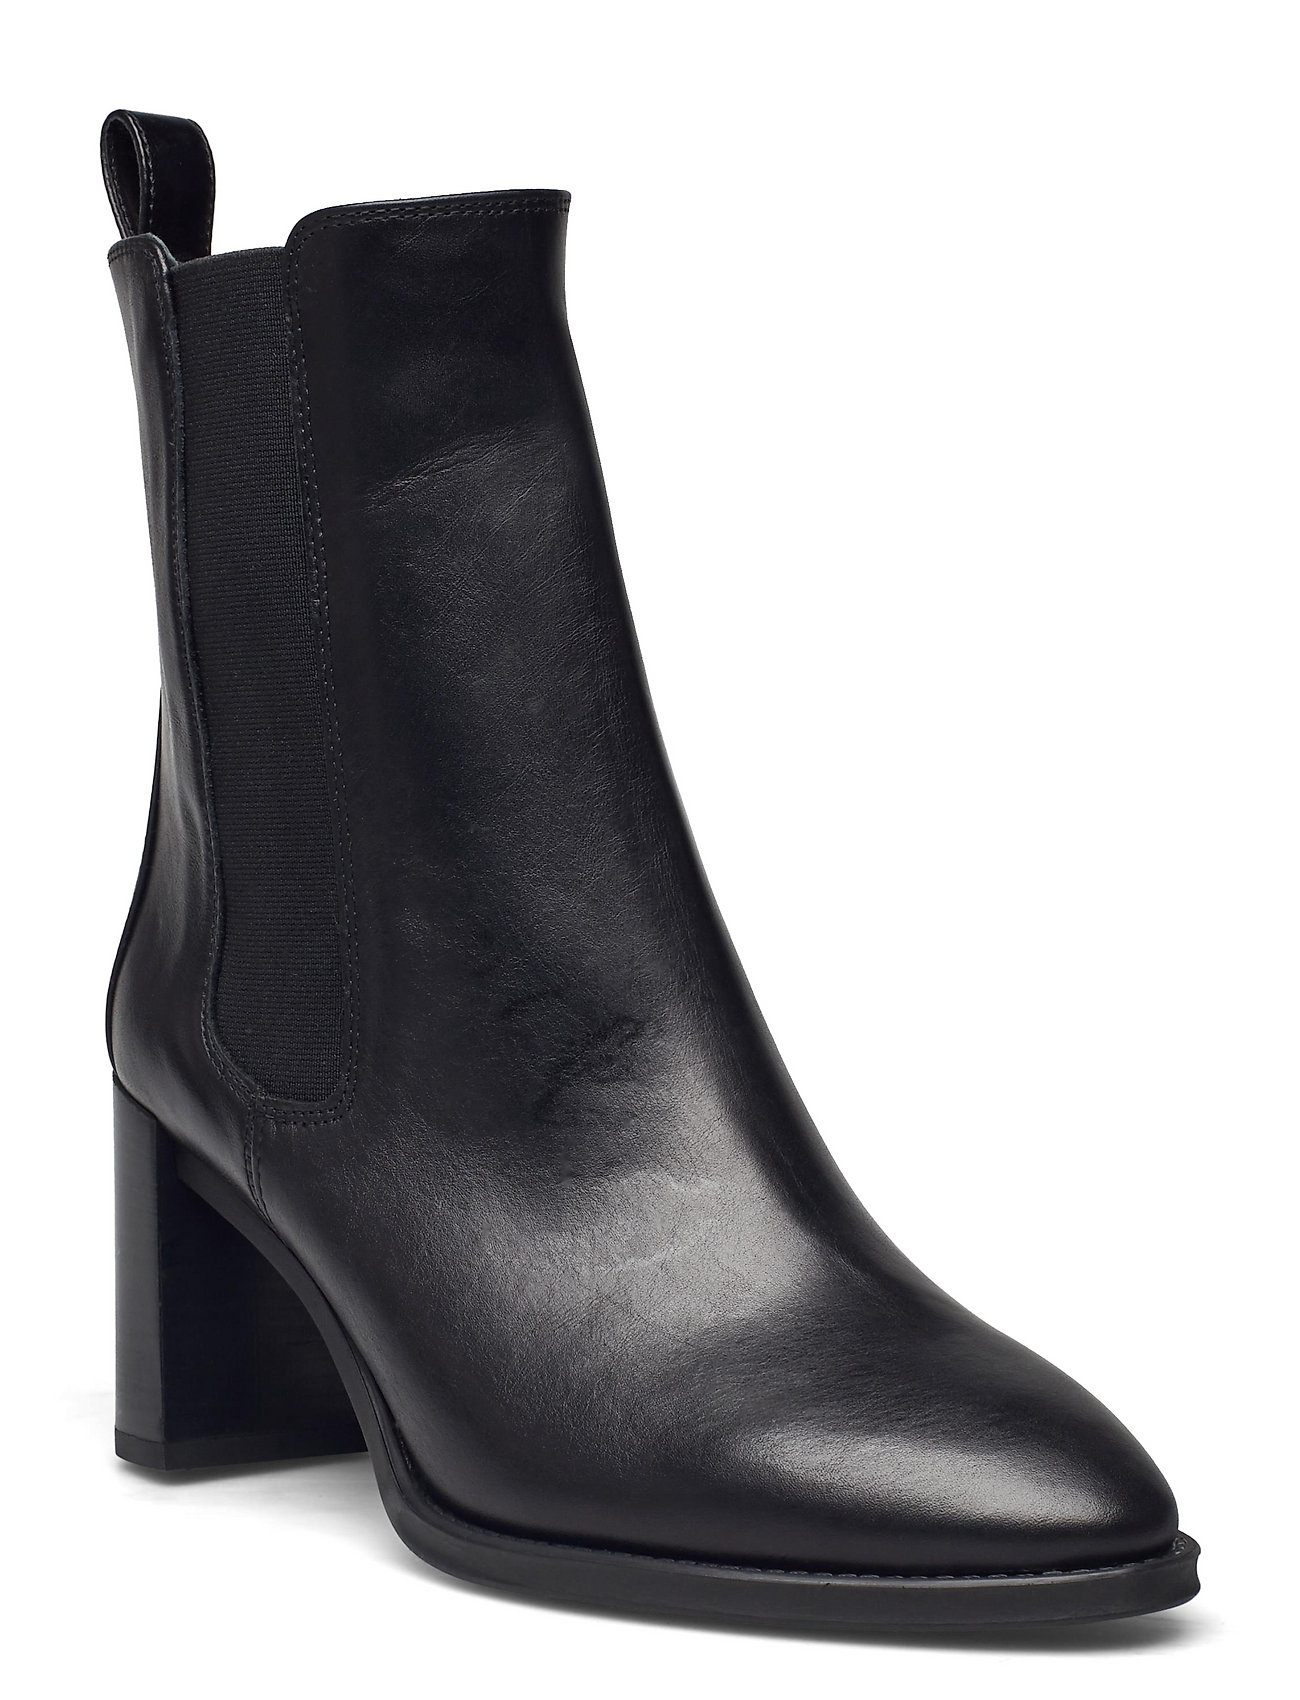 Ufron_sco Shoes Boots Ankle Boots Ankle Boot - Heel Musta UNISA